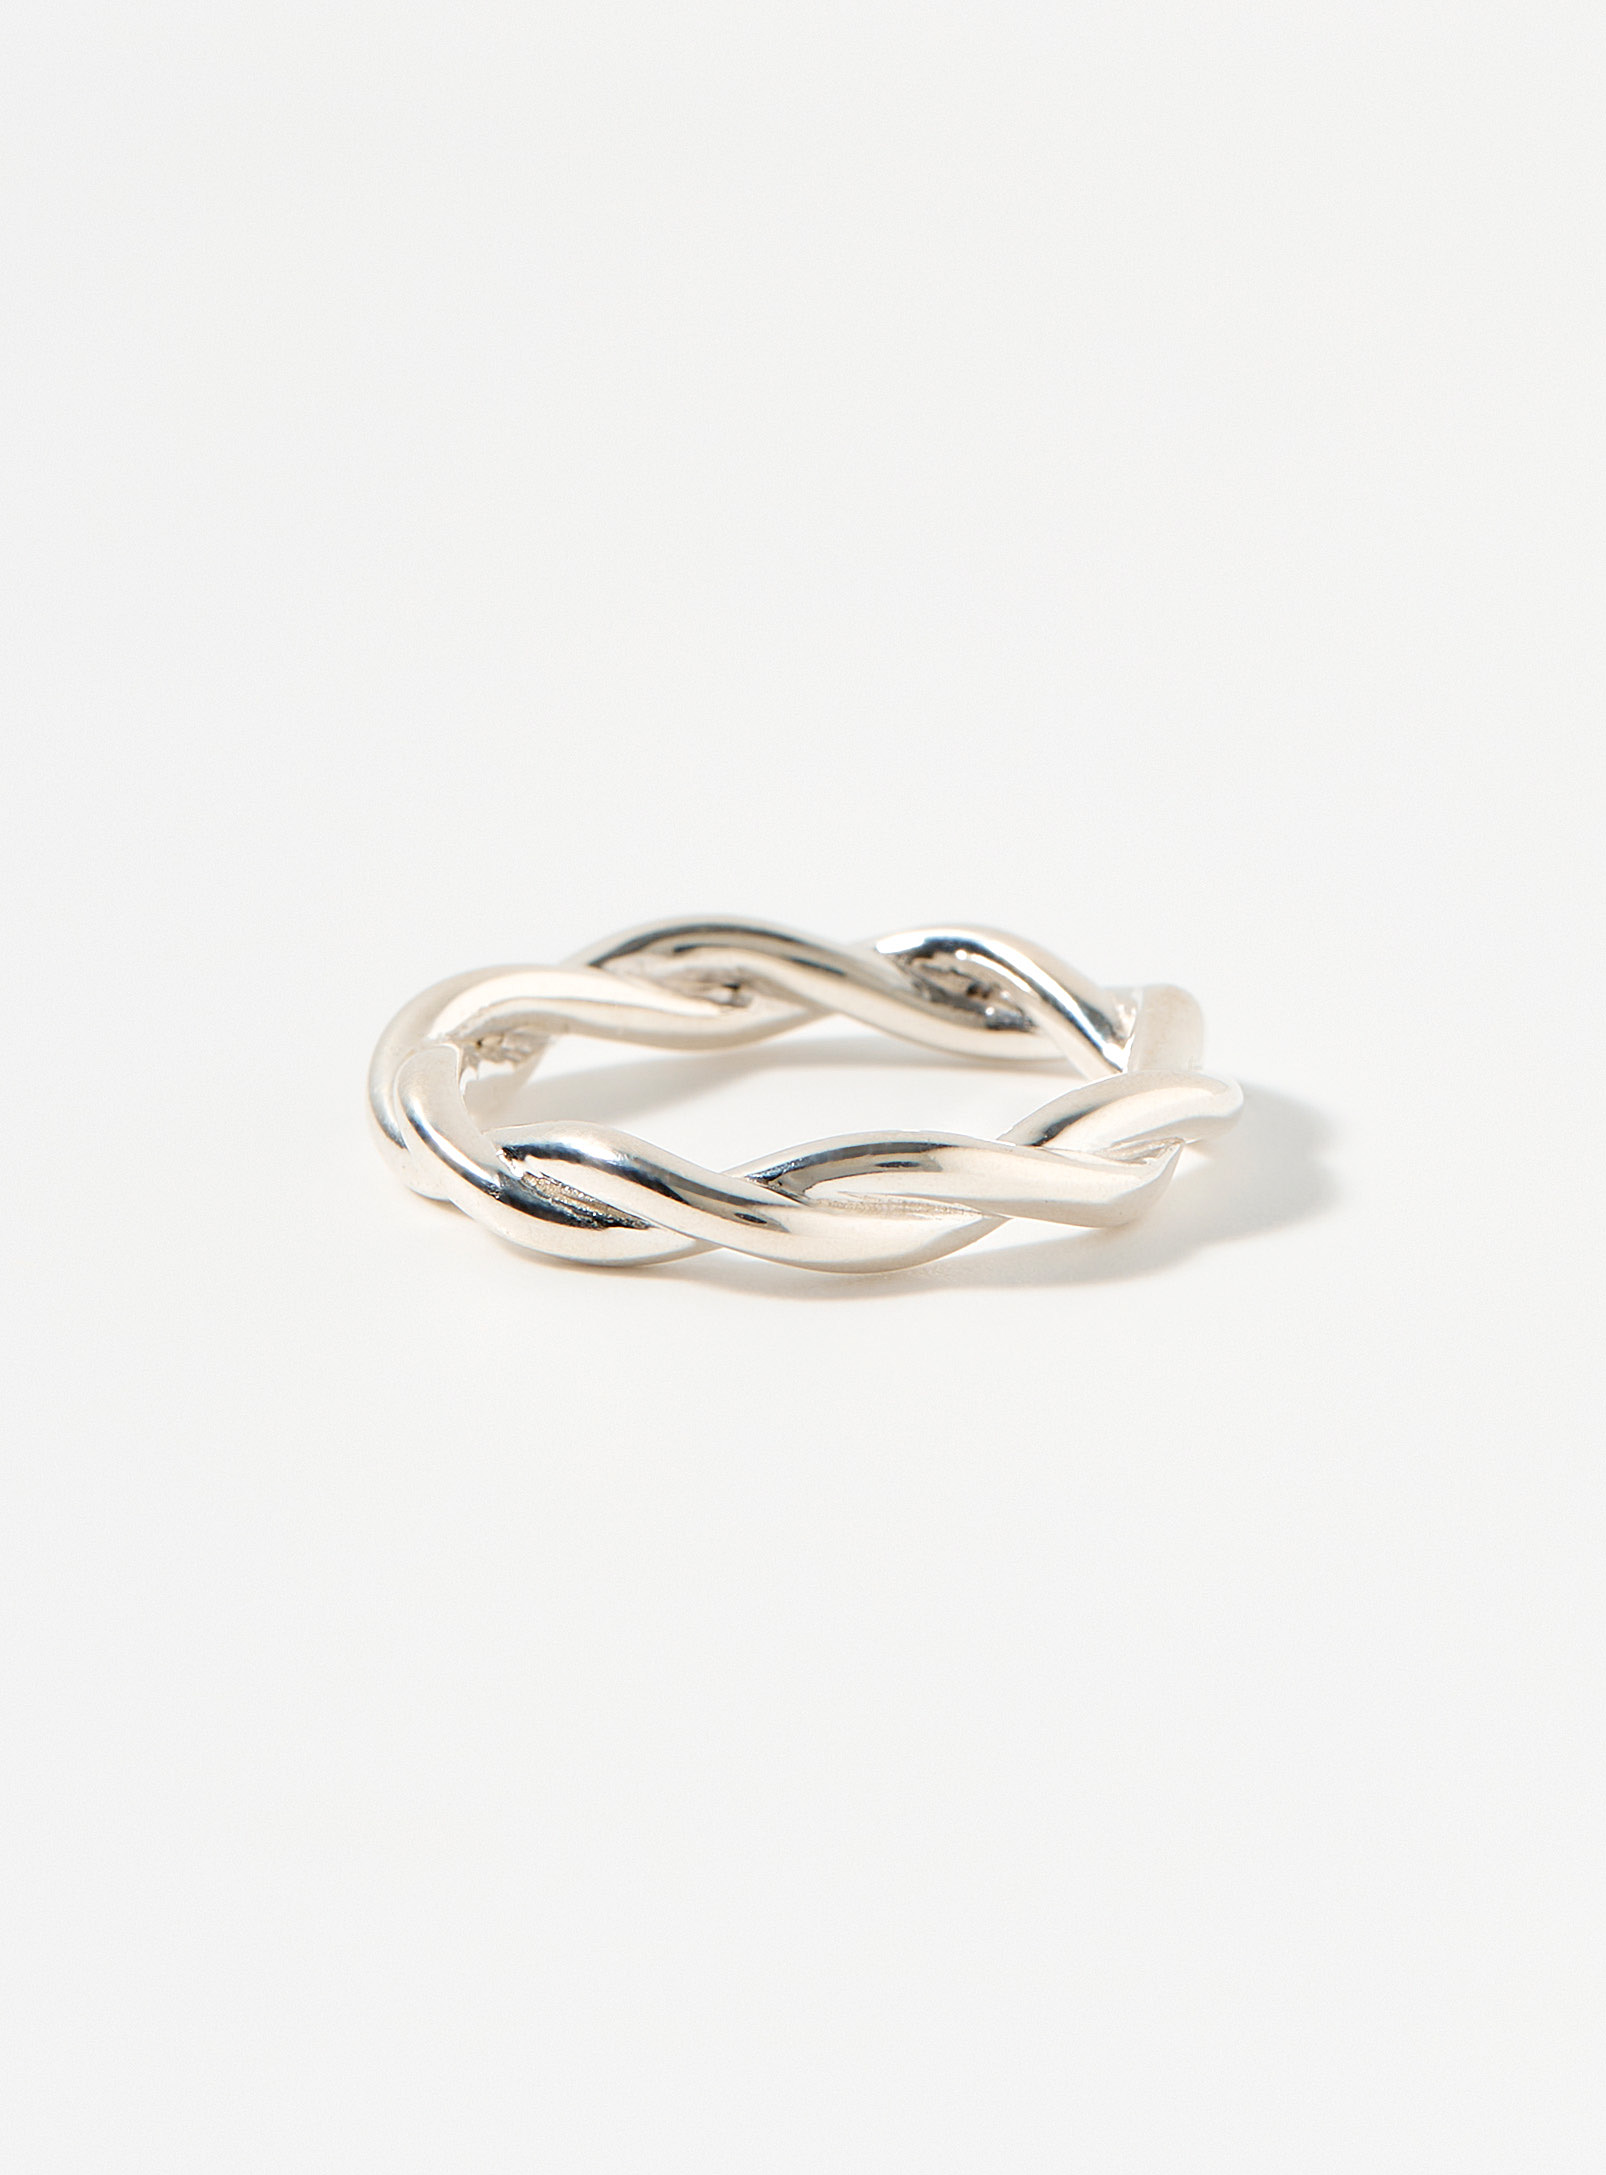 Simons - Women's Twisted silver ring